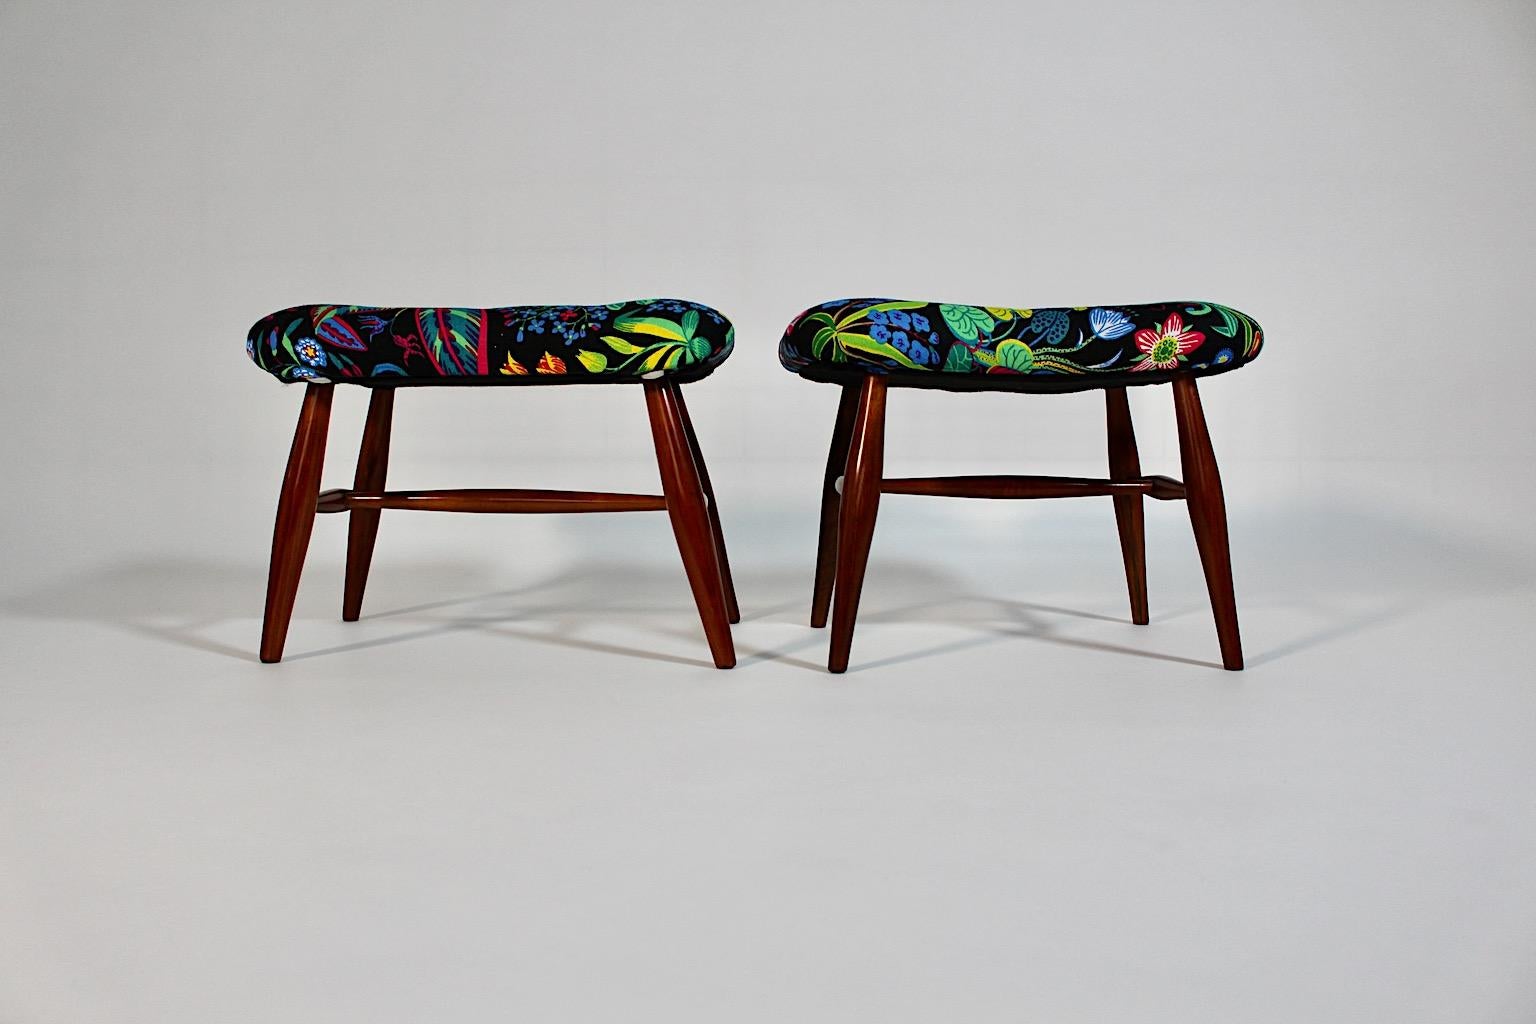 Art Deco Duo pair of stool or footstools from cherry and black floral textile fabric attributed to Josef Frank circa 1928 Austria.
A stunning duo or pair of stools design attributed to Josef Frank circa 1928 from cherrywood and reupholstered with